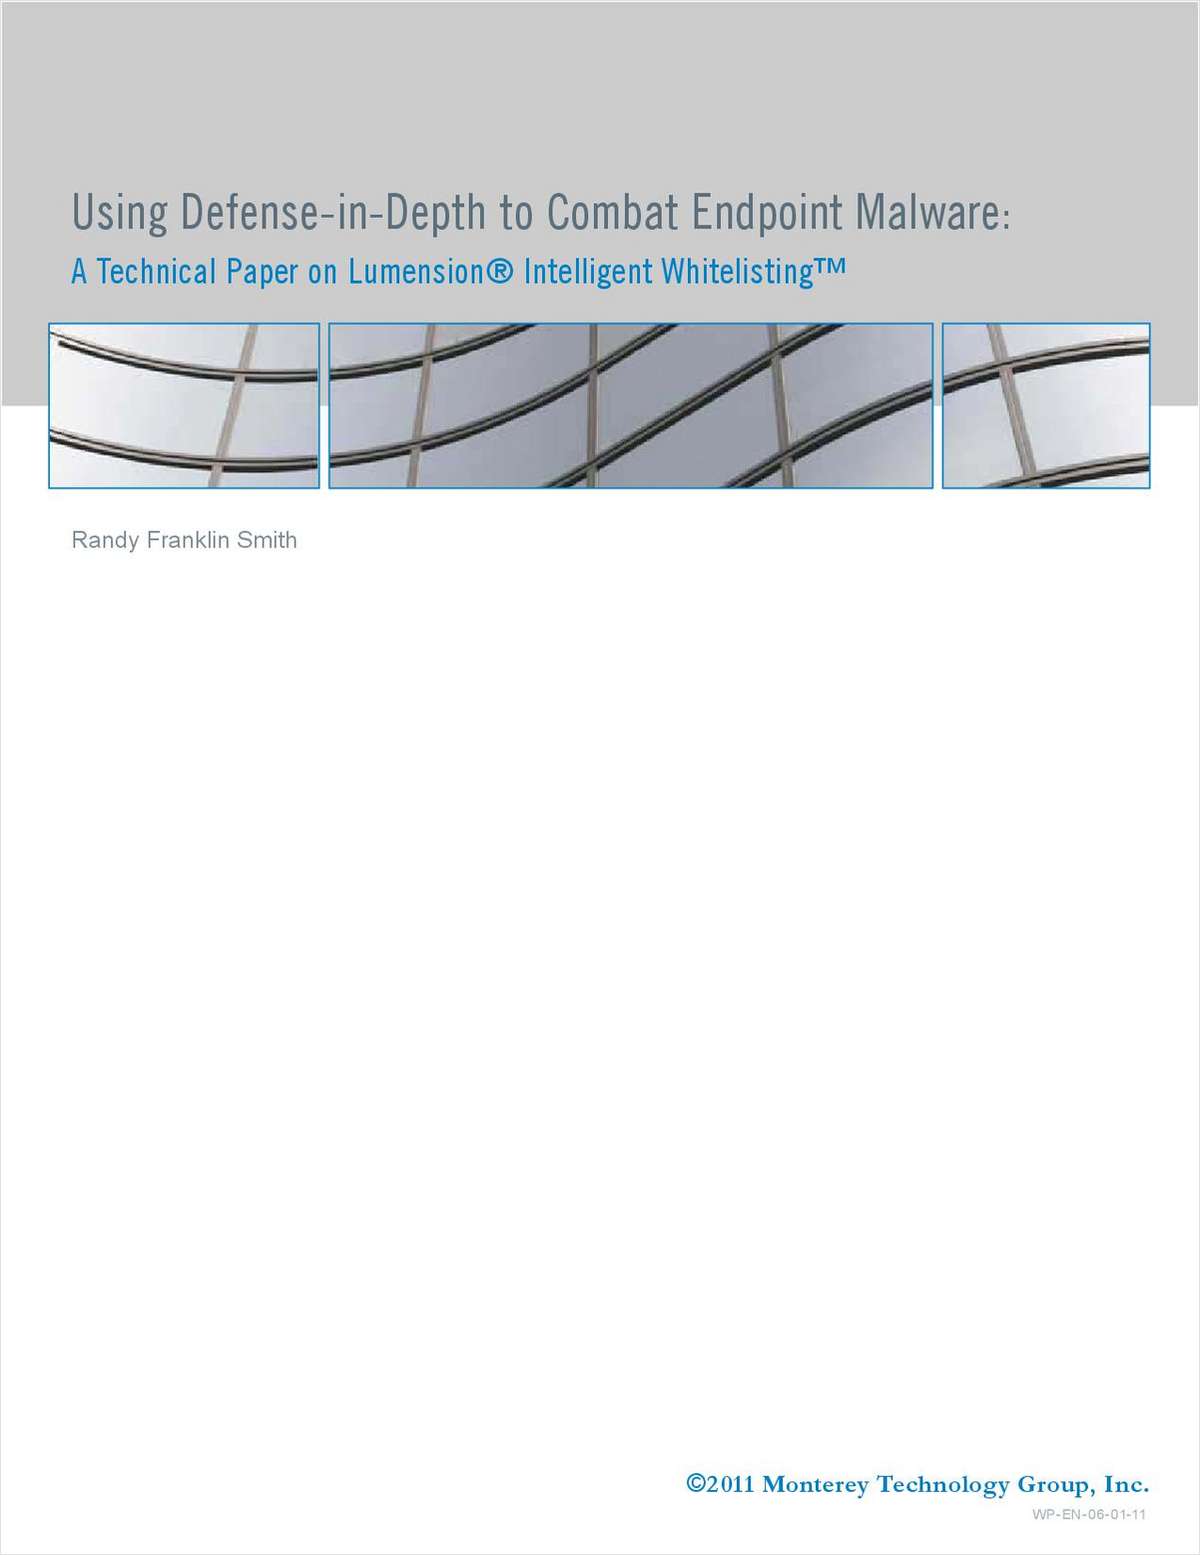 Using Defense-in-Depth to Combat Endpoint Malware: A Technical Paper